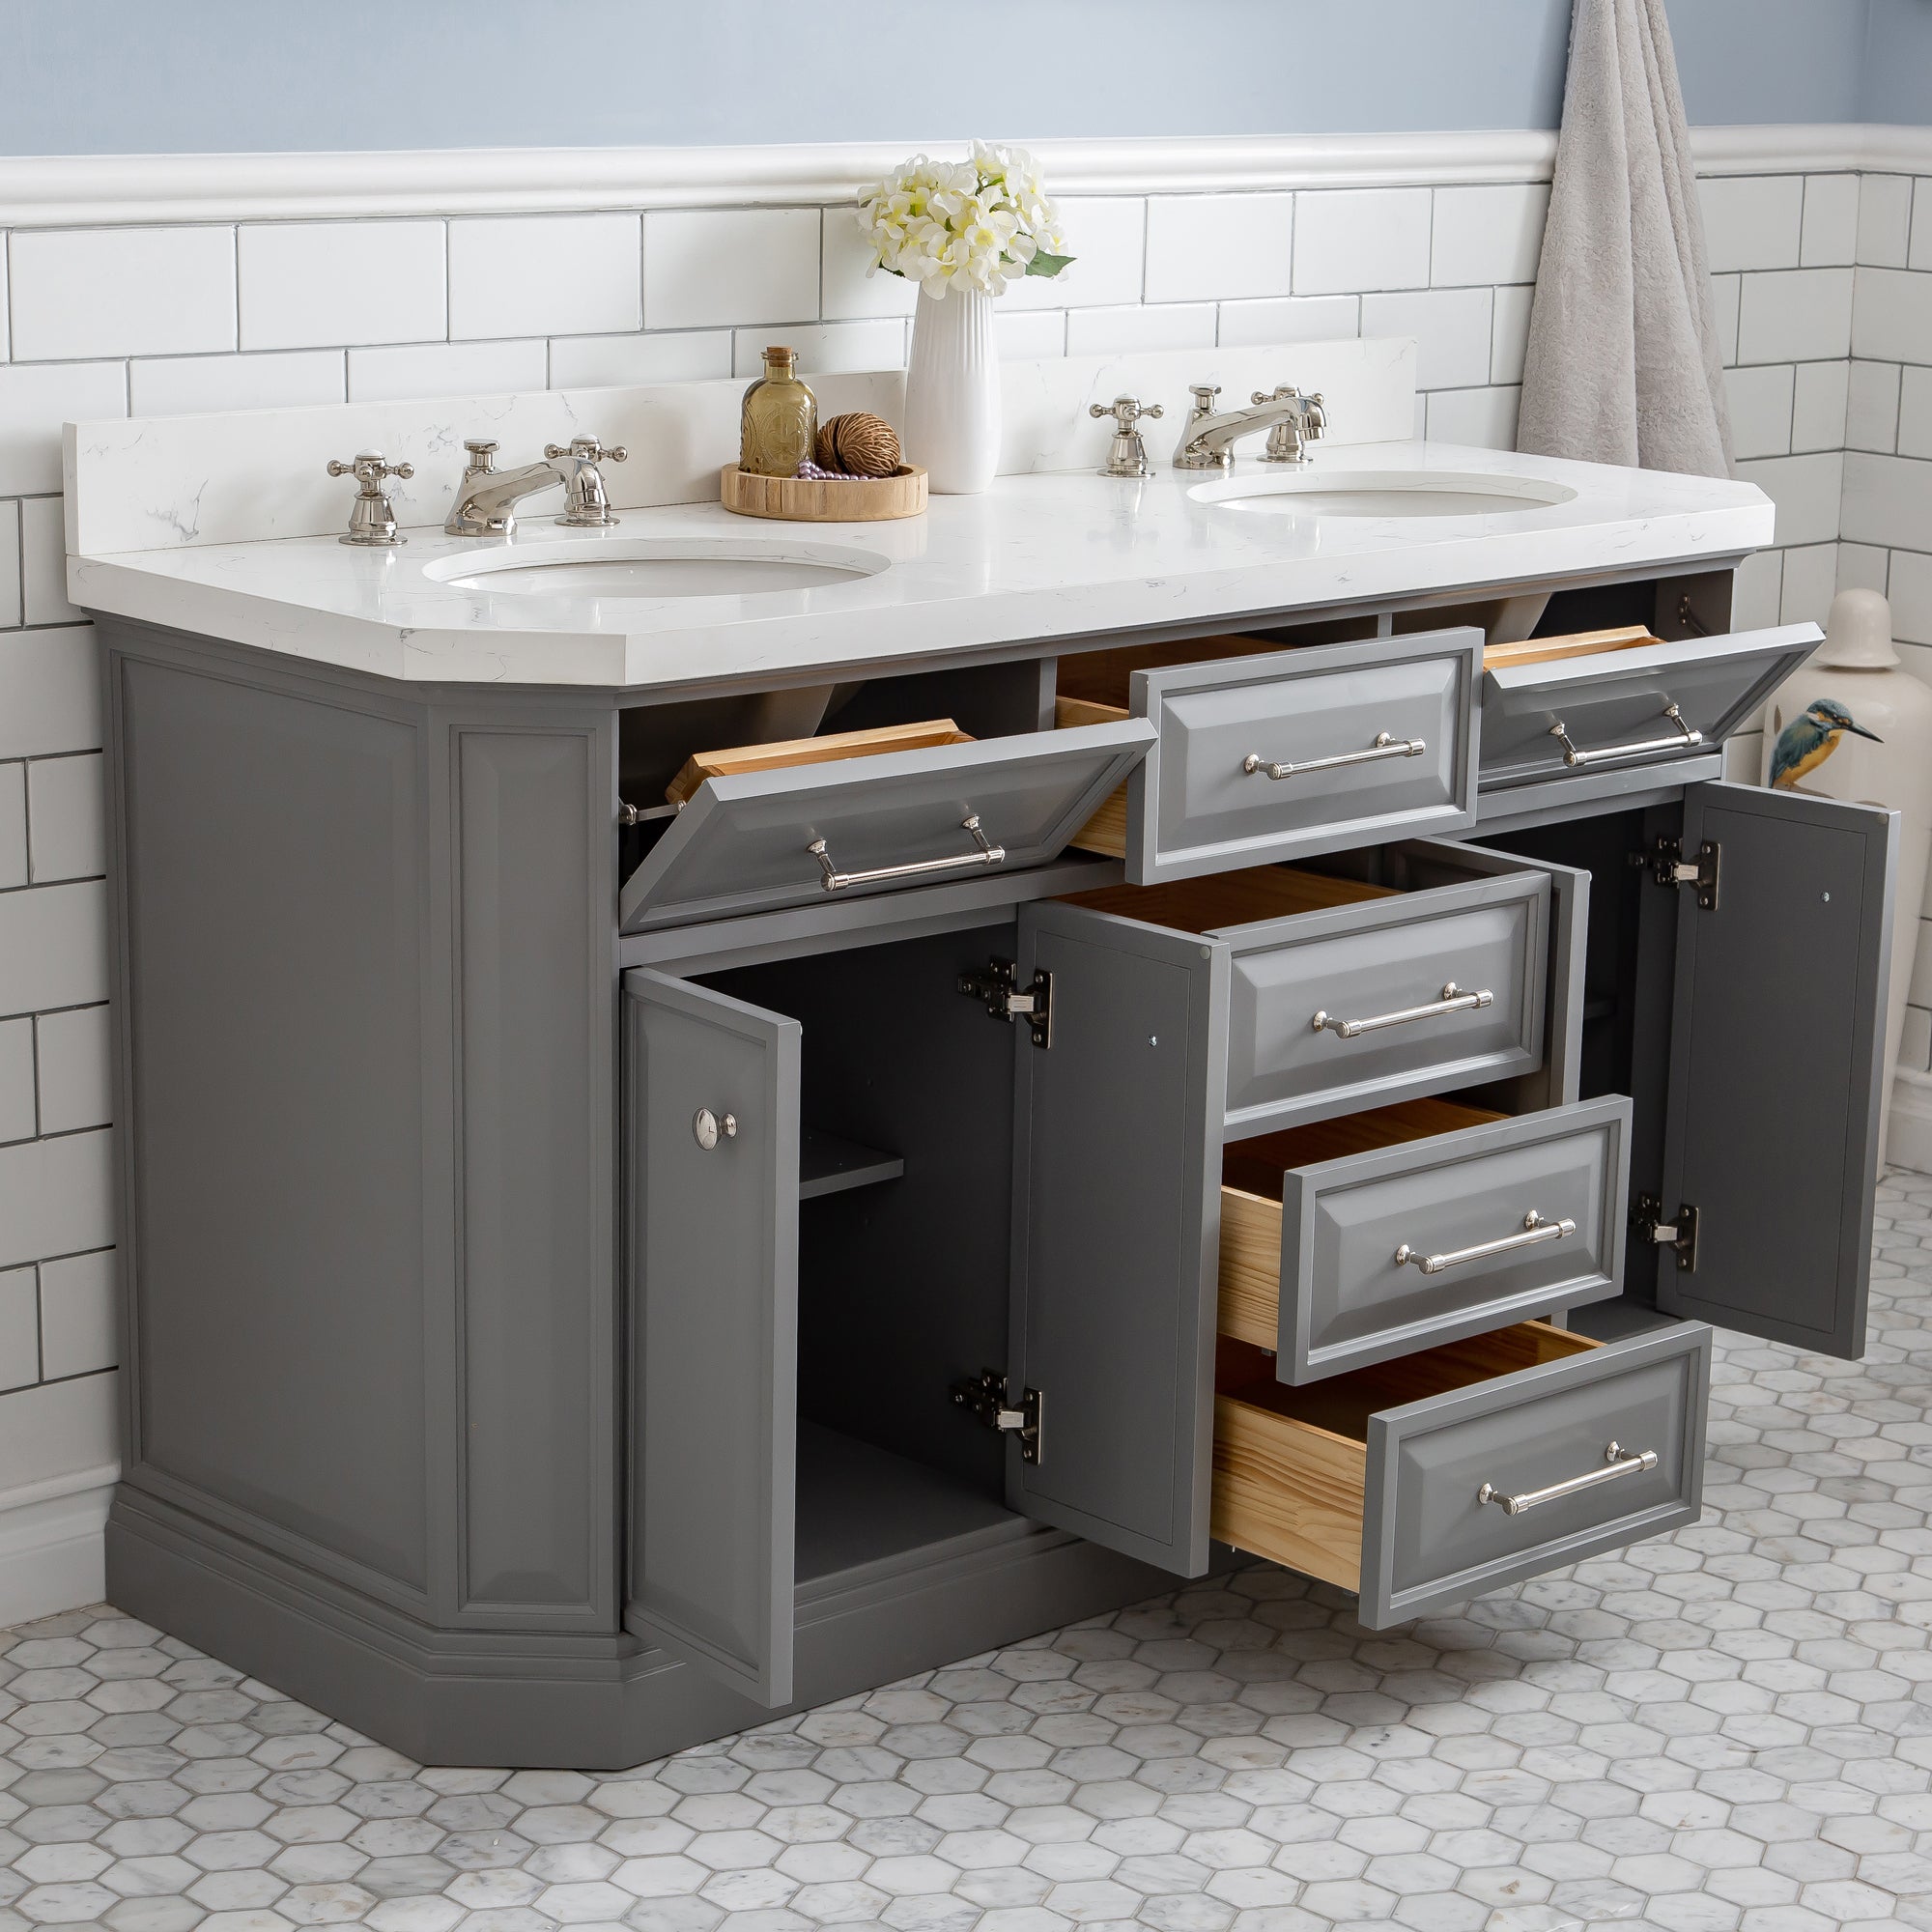 Water Creation | 60" Palace Collection Quartz Carrara Cashmere Grey Bathroom Vanity Set With Hardware in Polished Nickel (PVD) Finish | PA60QZ05CG-000000000